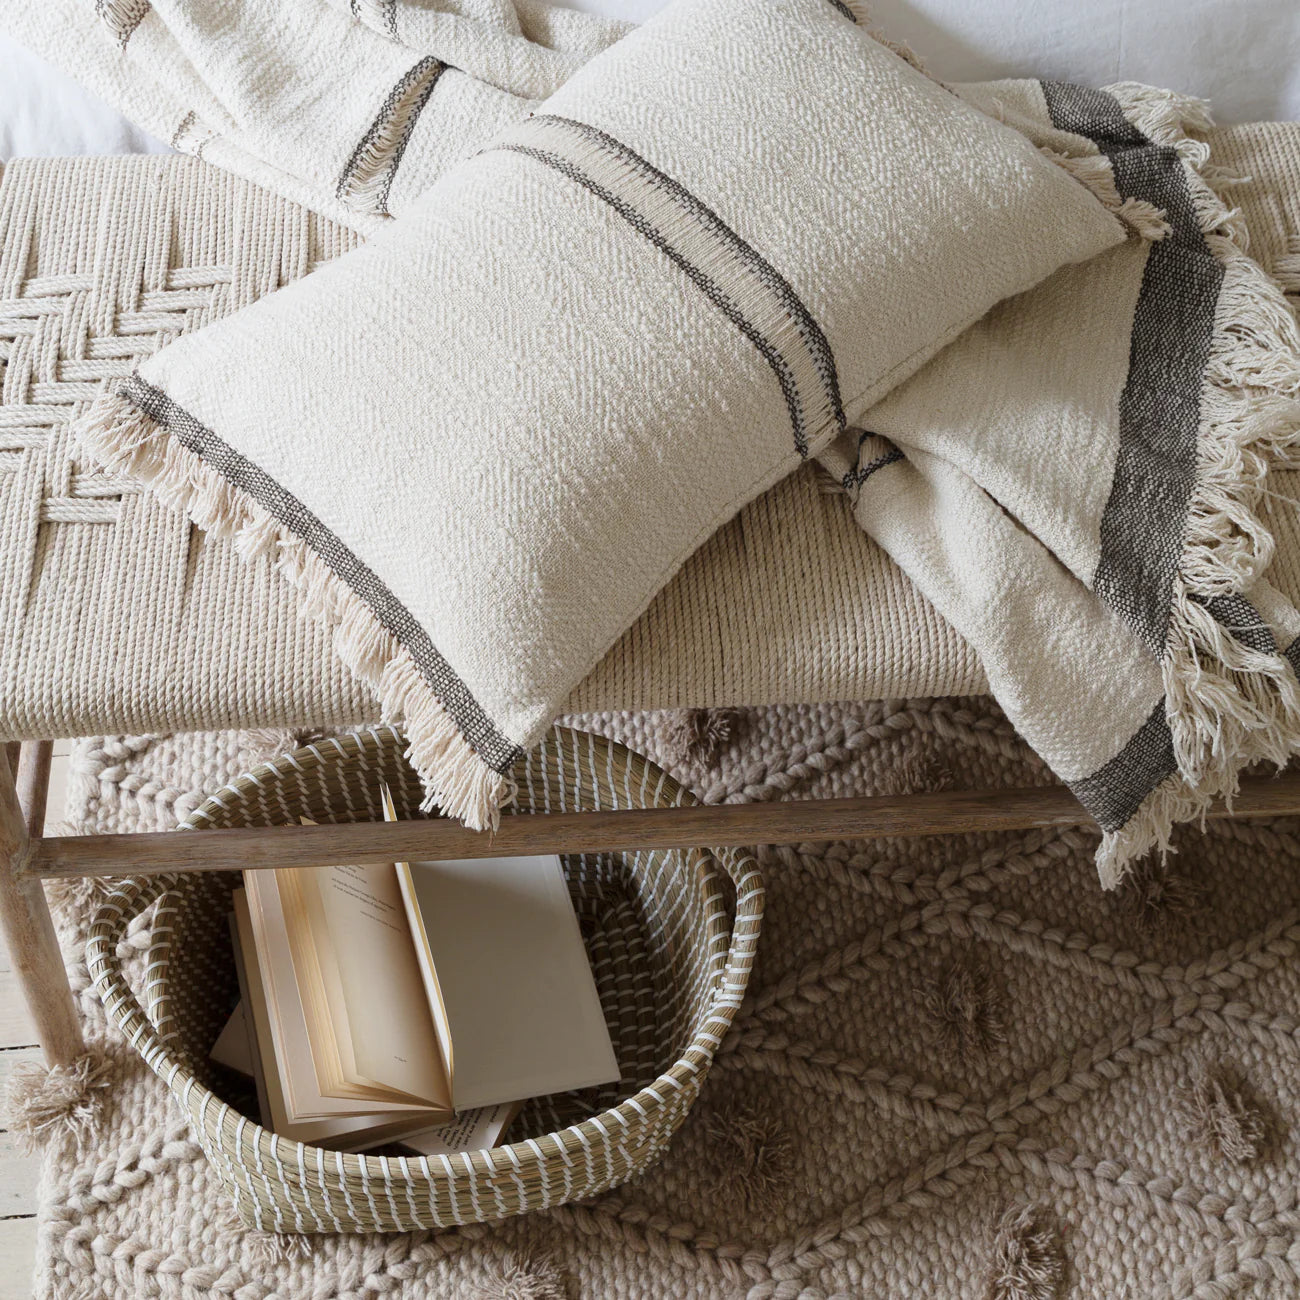 Textured cotton throw blanket and matching cushion on a woven bench with a chunky rug beneath.